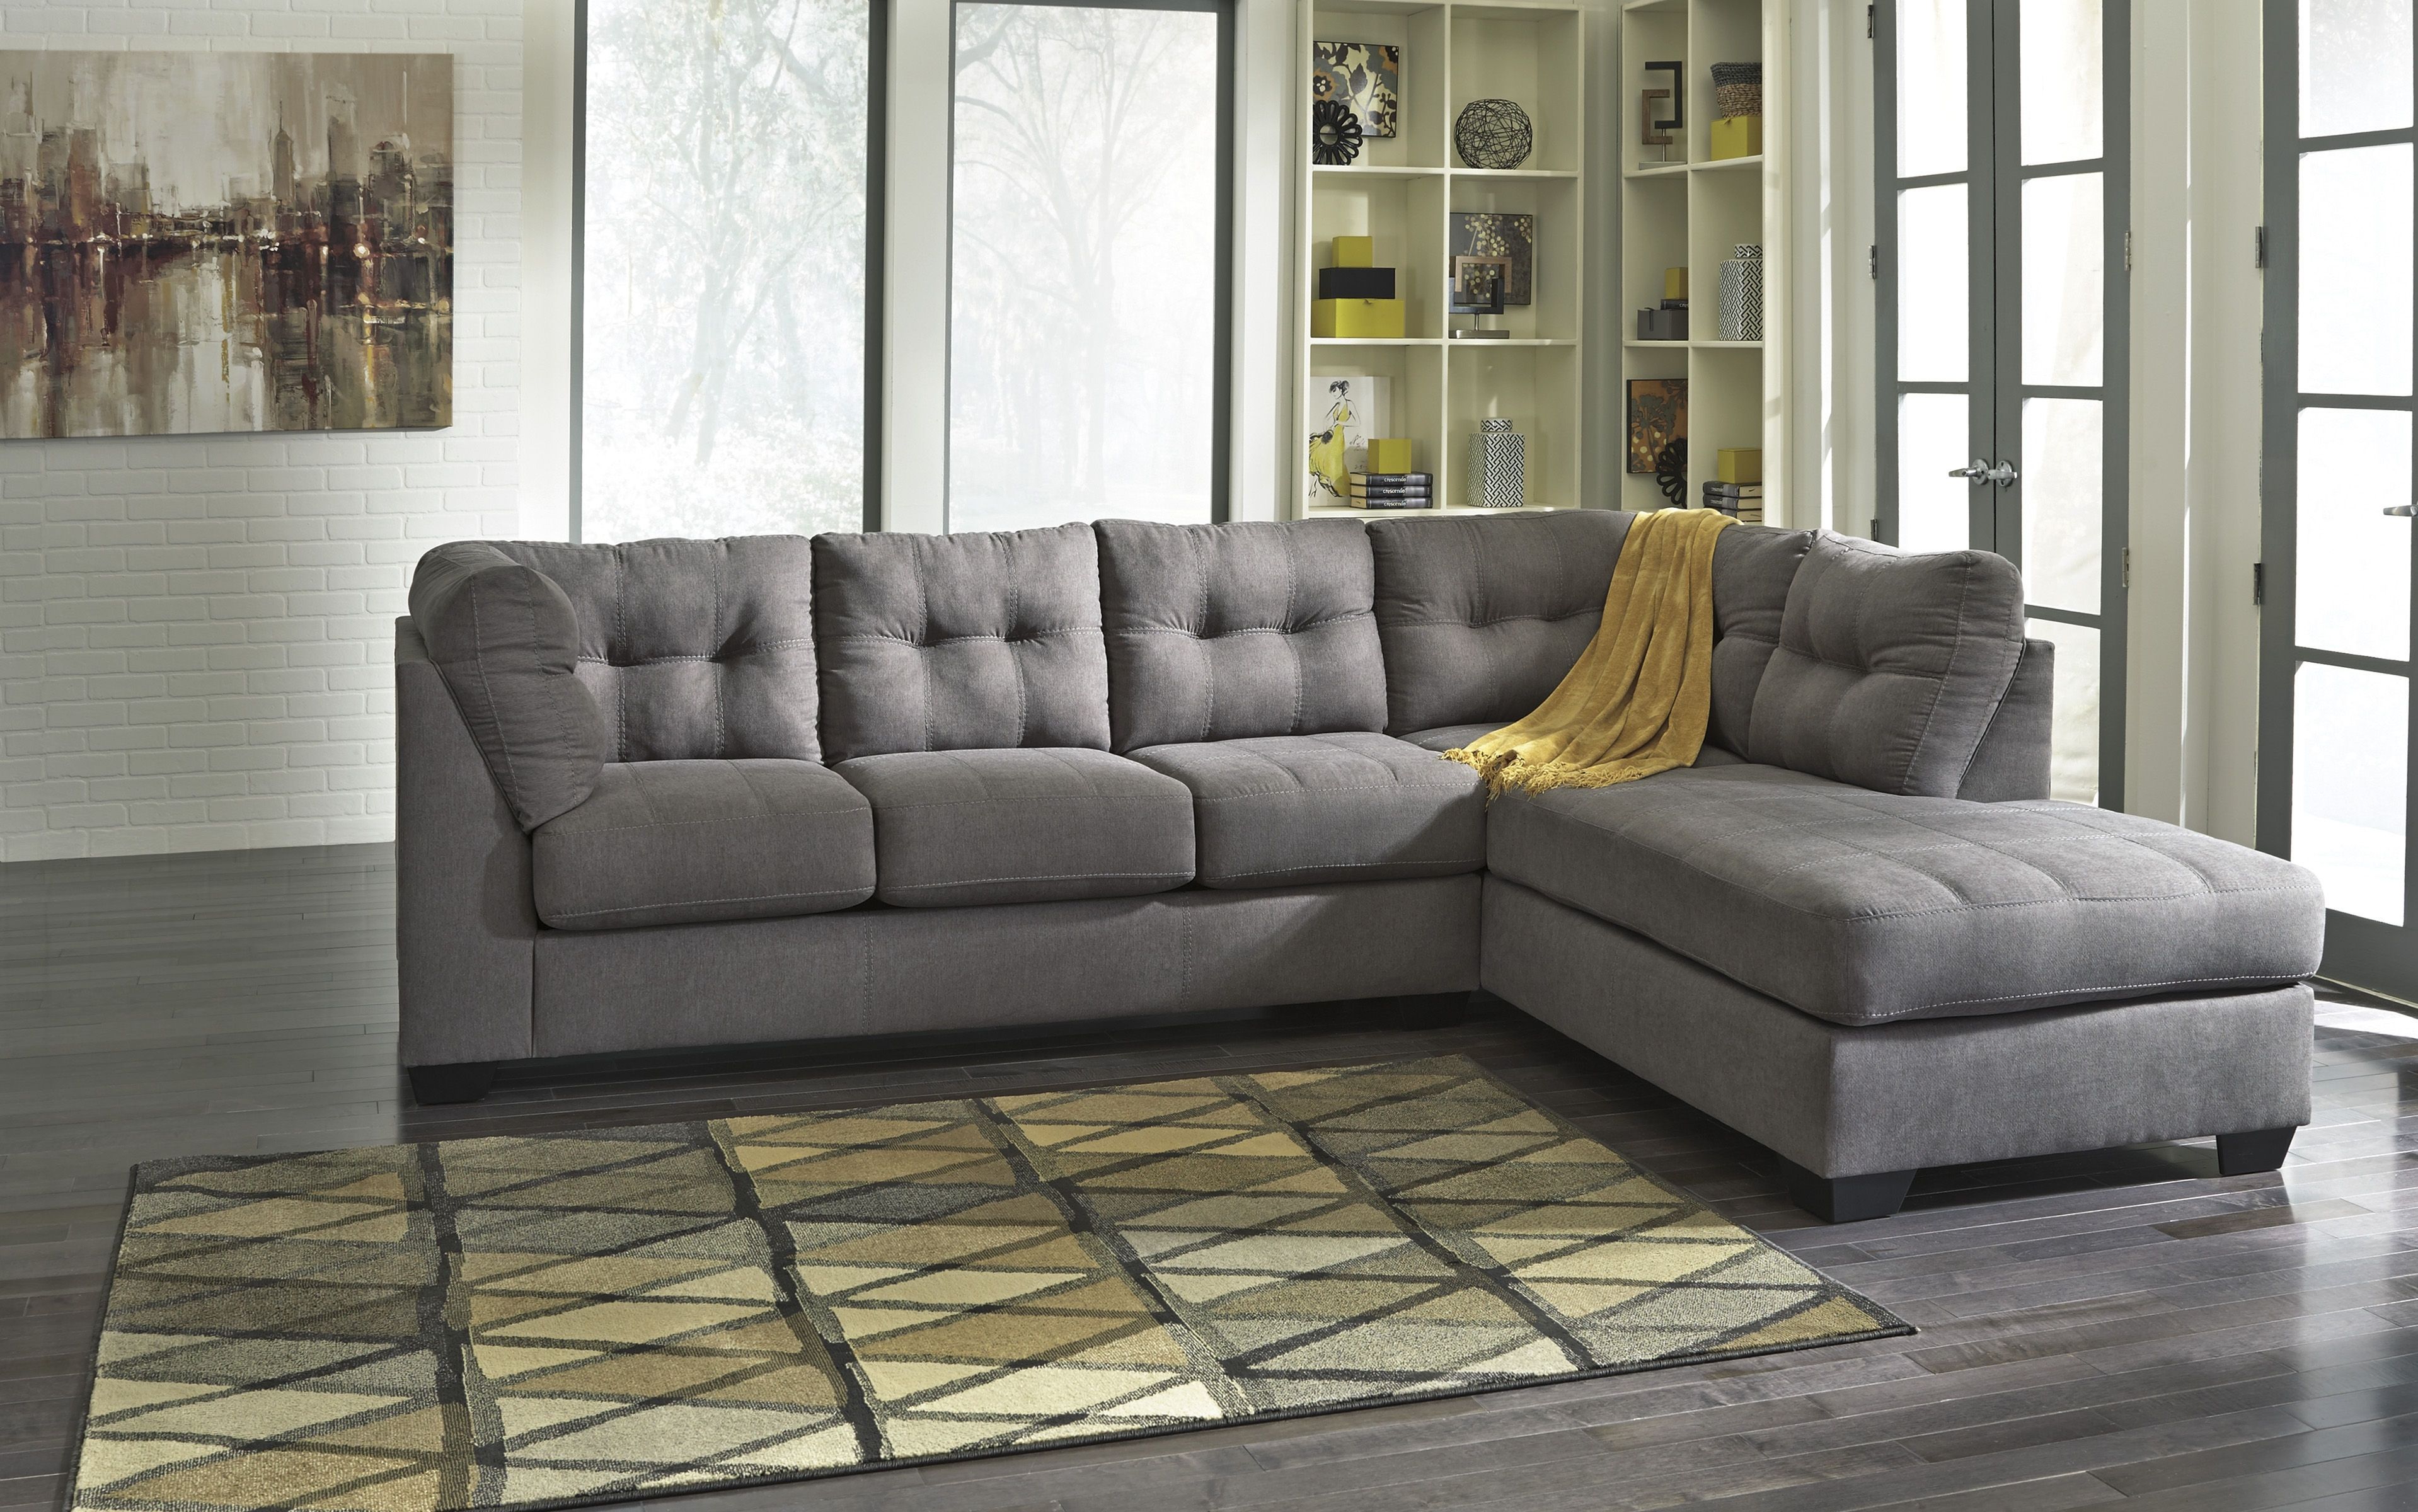 Ashley Furniture Maier Charcoal Raf Chaise Sectional | The Classy Home In Lucy Dark Grey 2 Piece Sectionals With Raf Chaise (View 9 of 30)